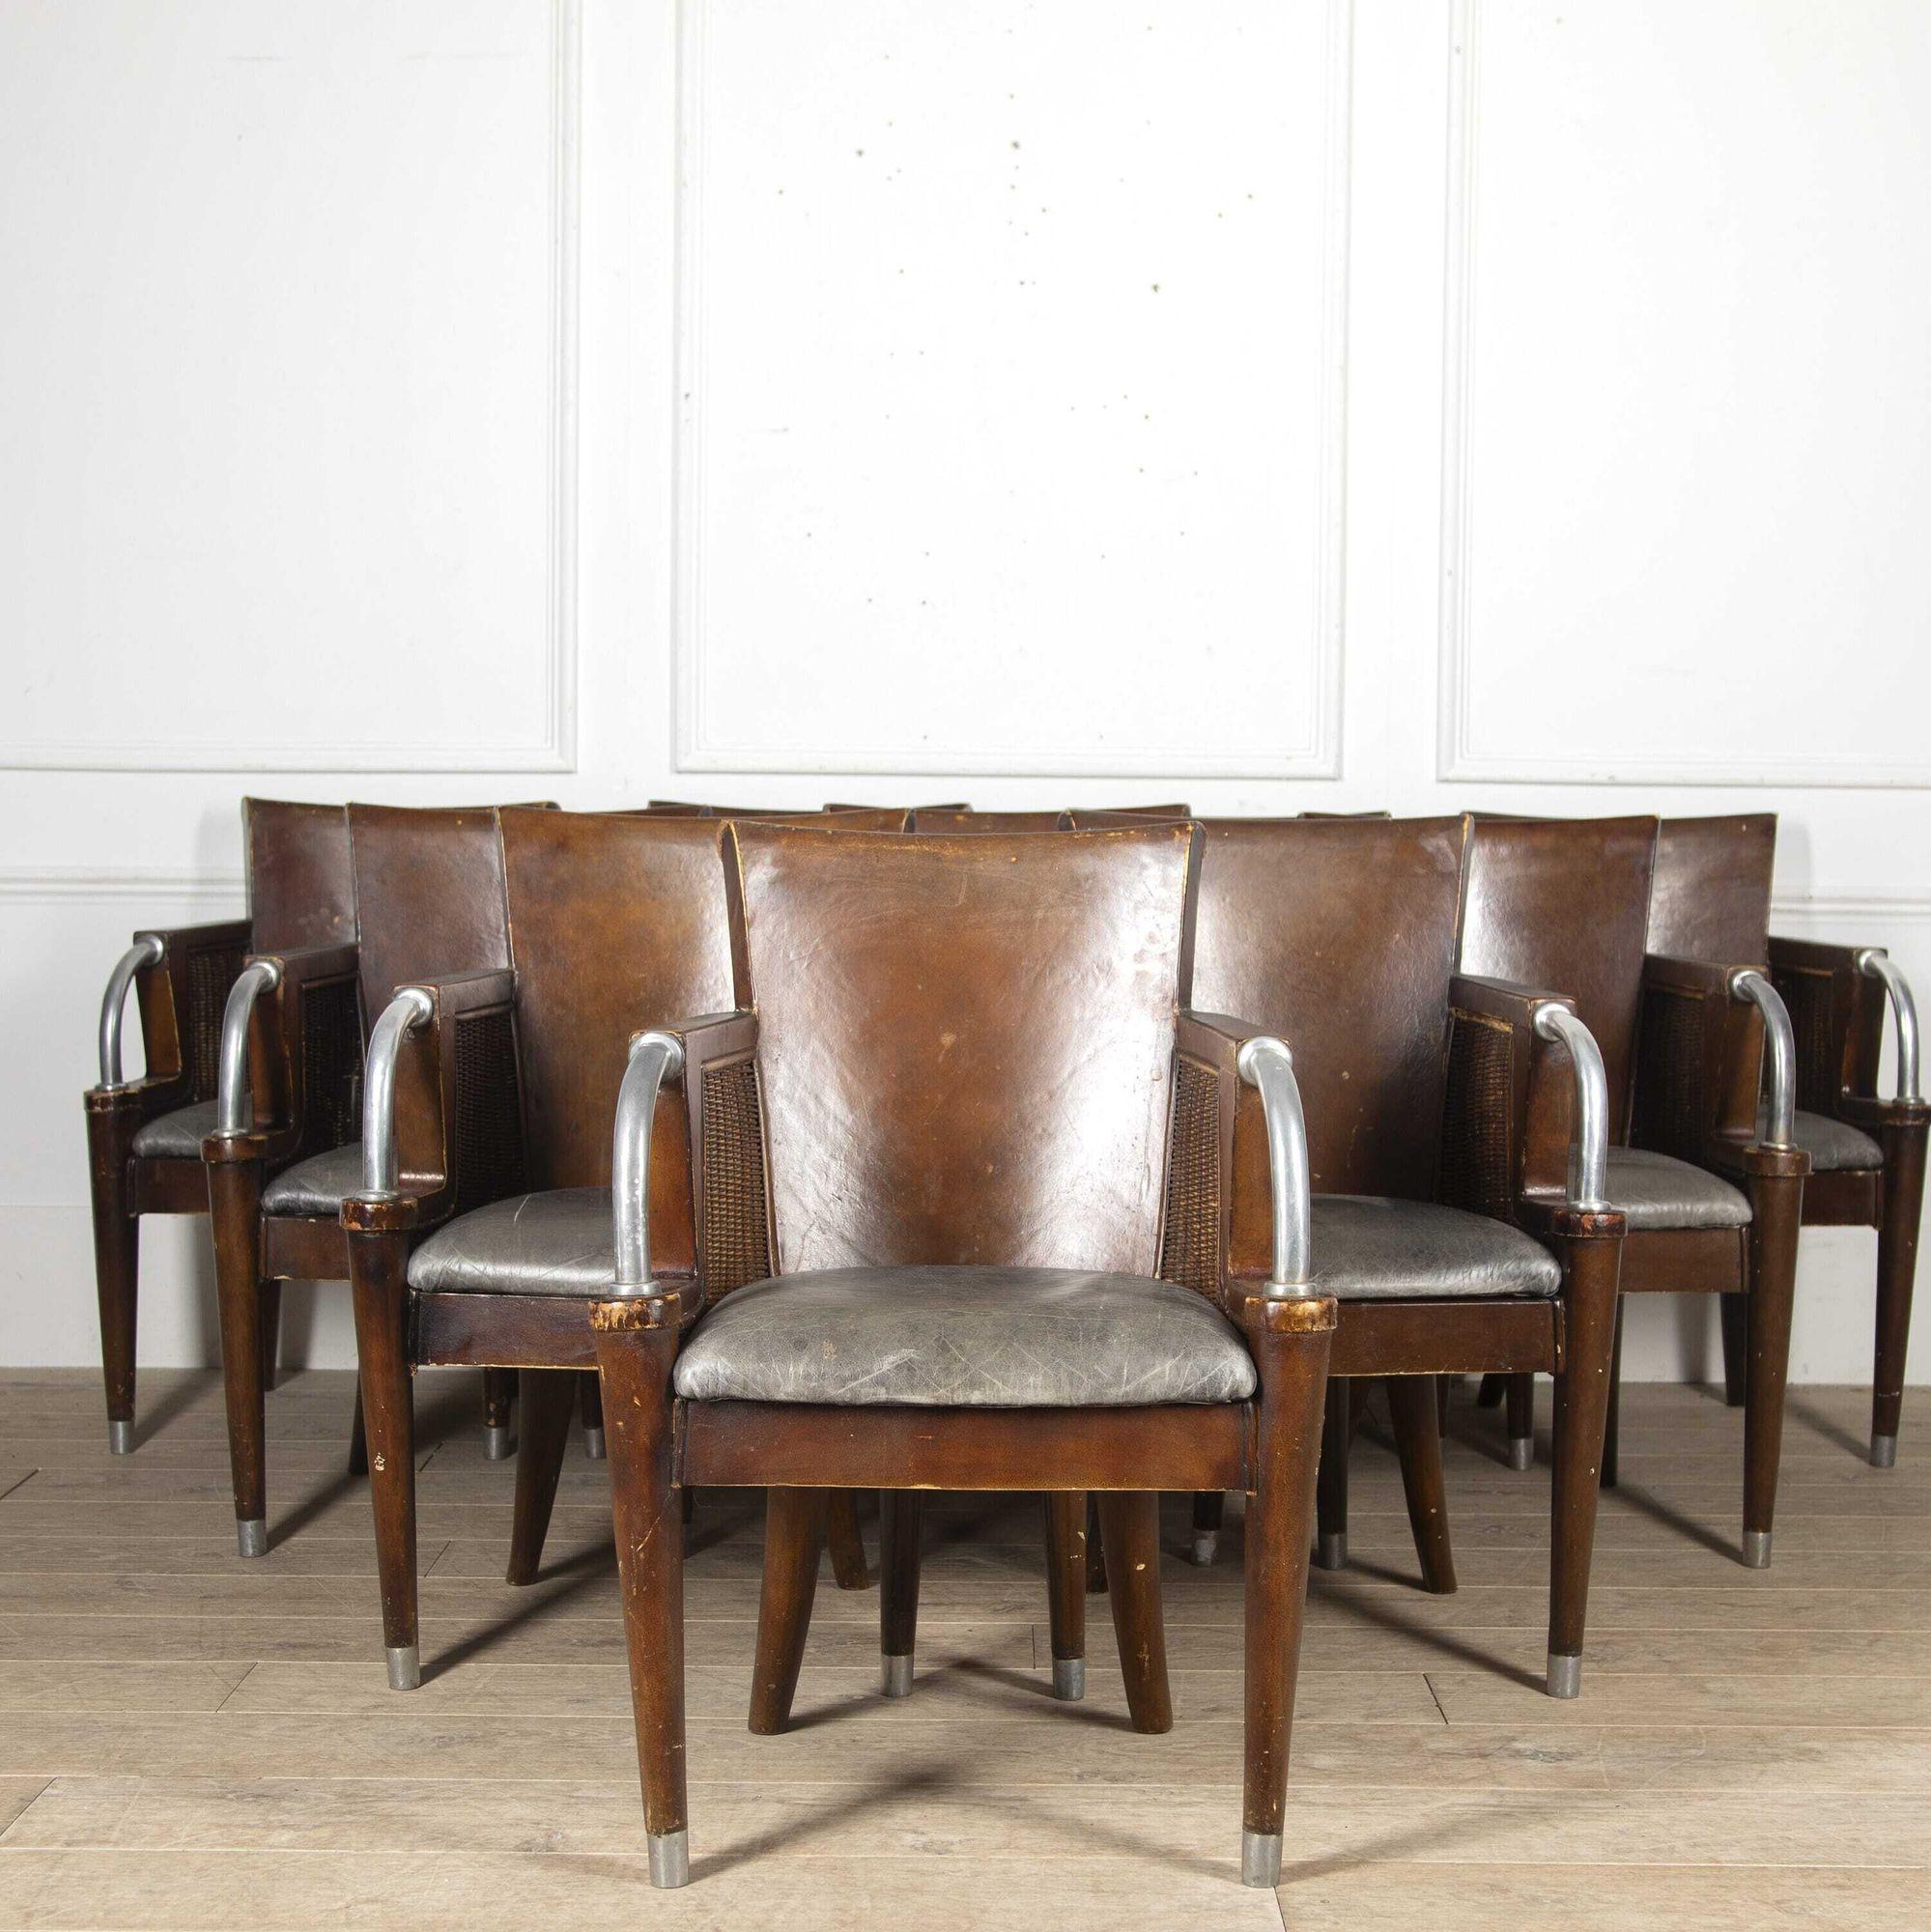 Set of ten armchairs in the Art Deco style.
These charming chairs are constructed from a mixture of wicker, metal, and leather and are of very good size. All ten chairs have sturdy constructions with very few signs of wear. 
They are believed to